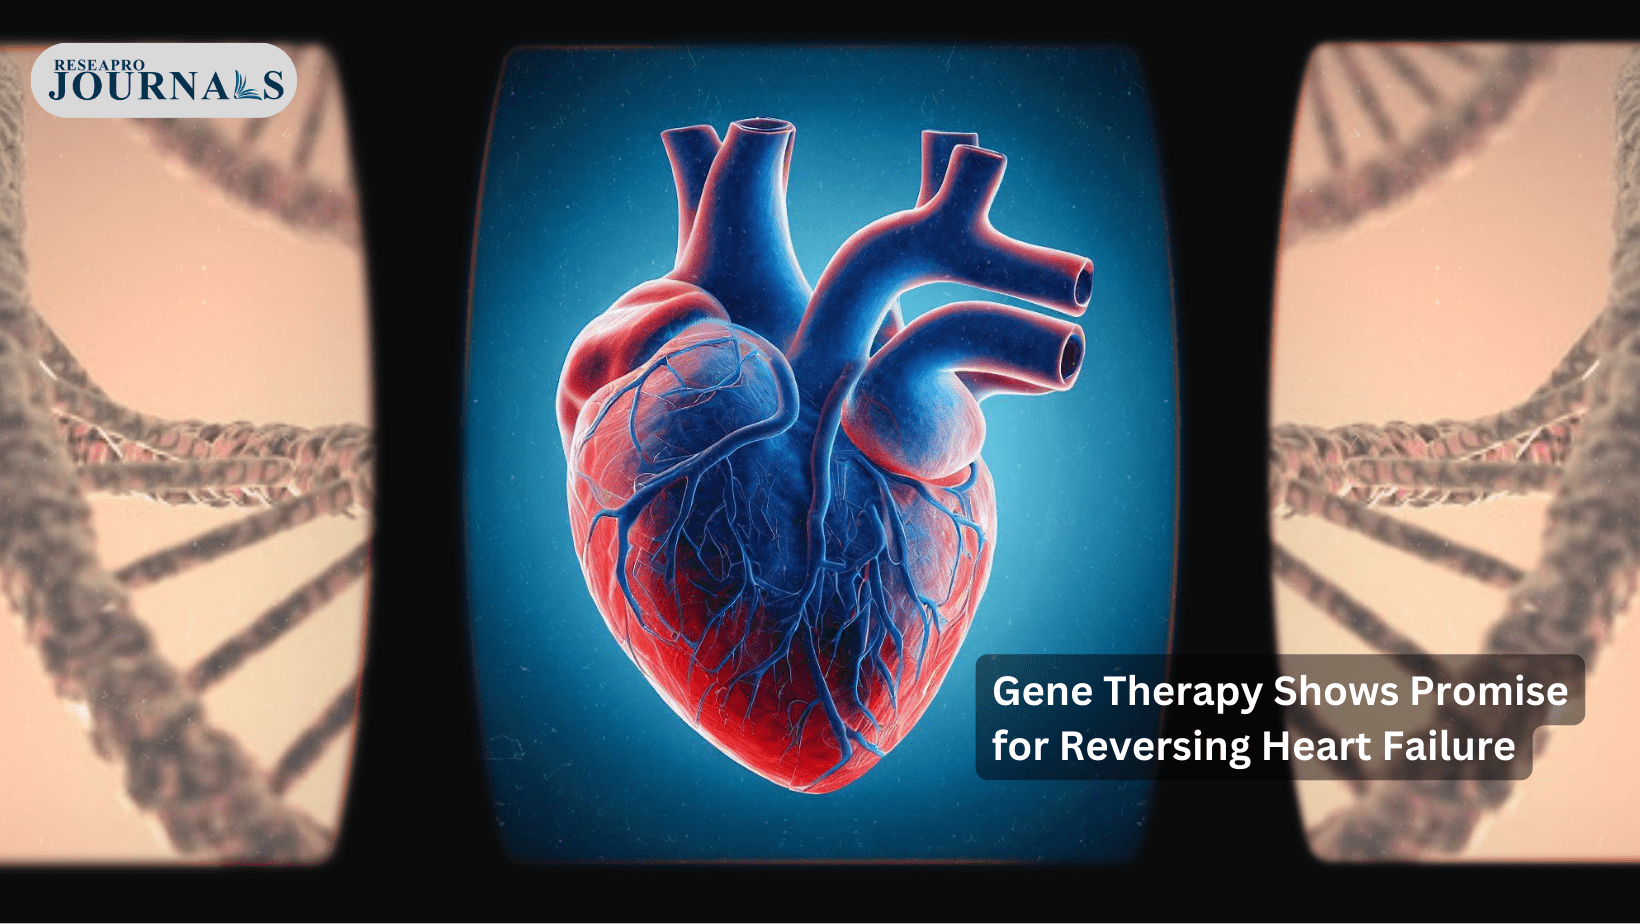 Gene Therapy Shows Promise for Reversing Heart Failure